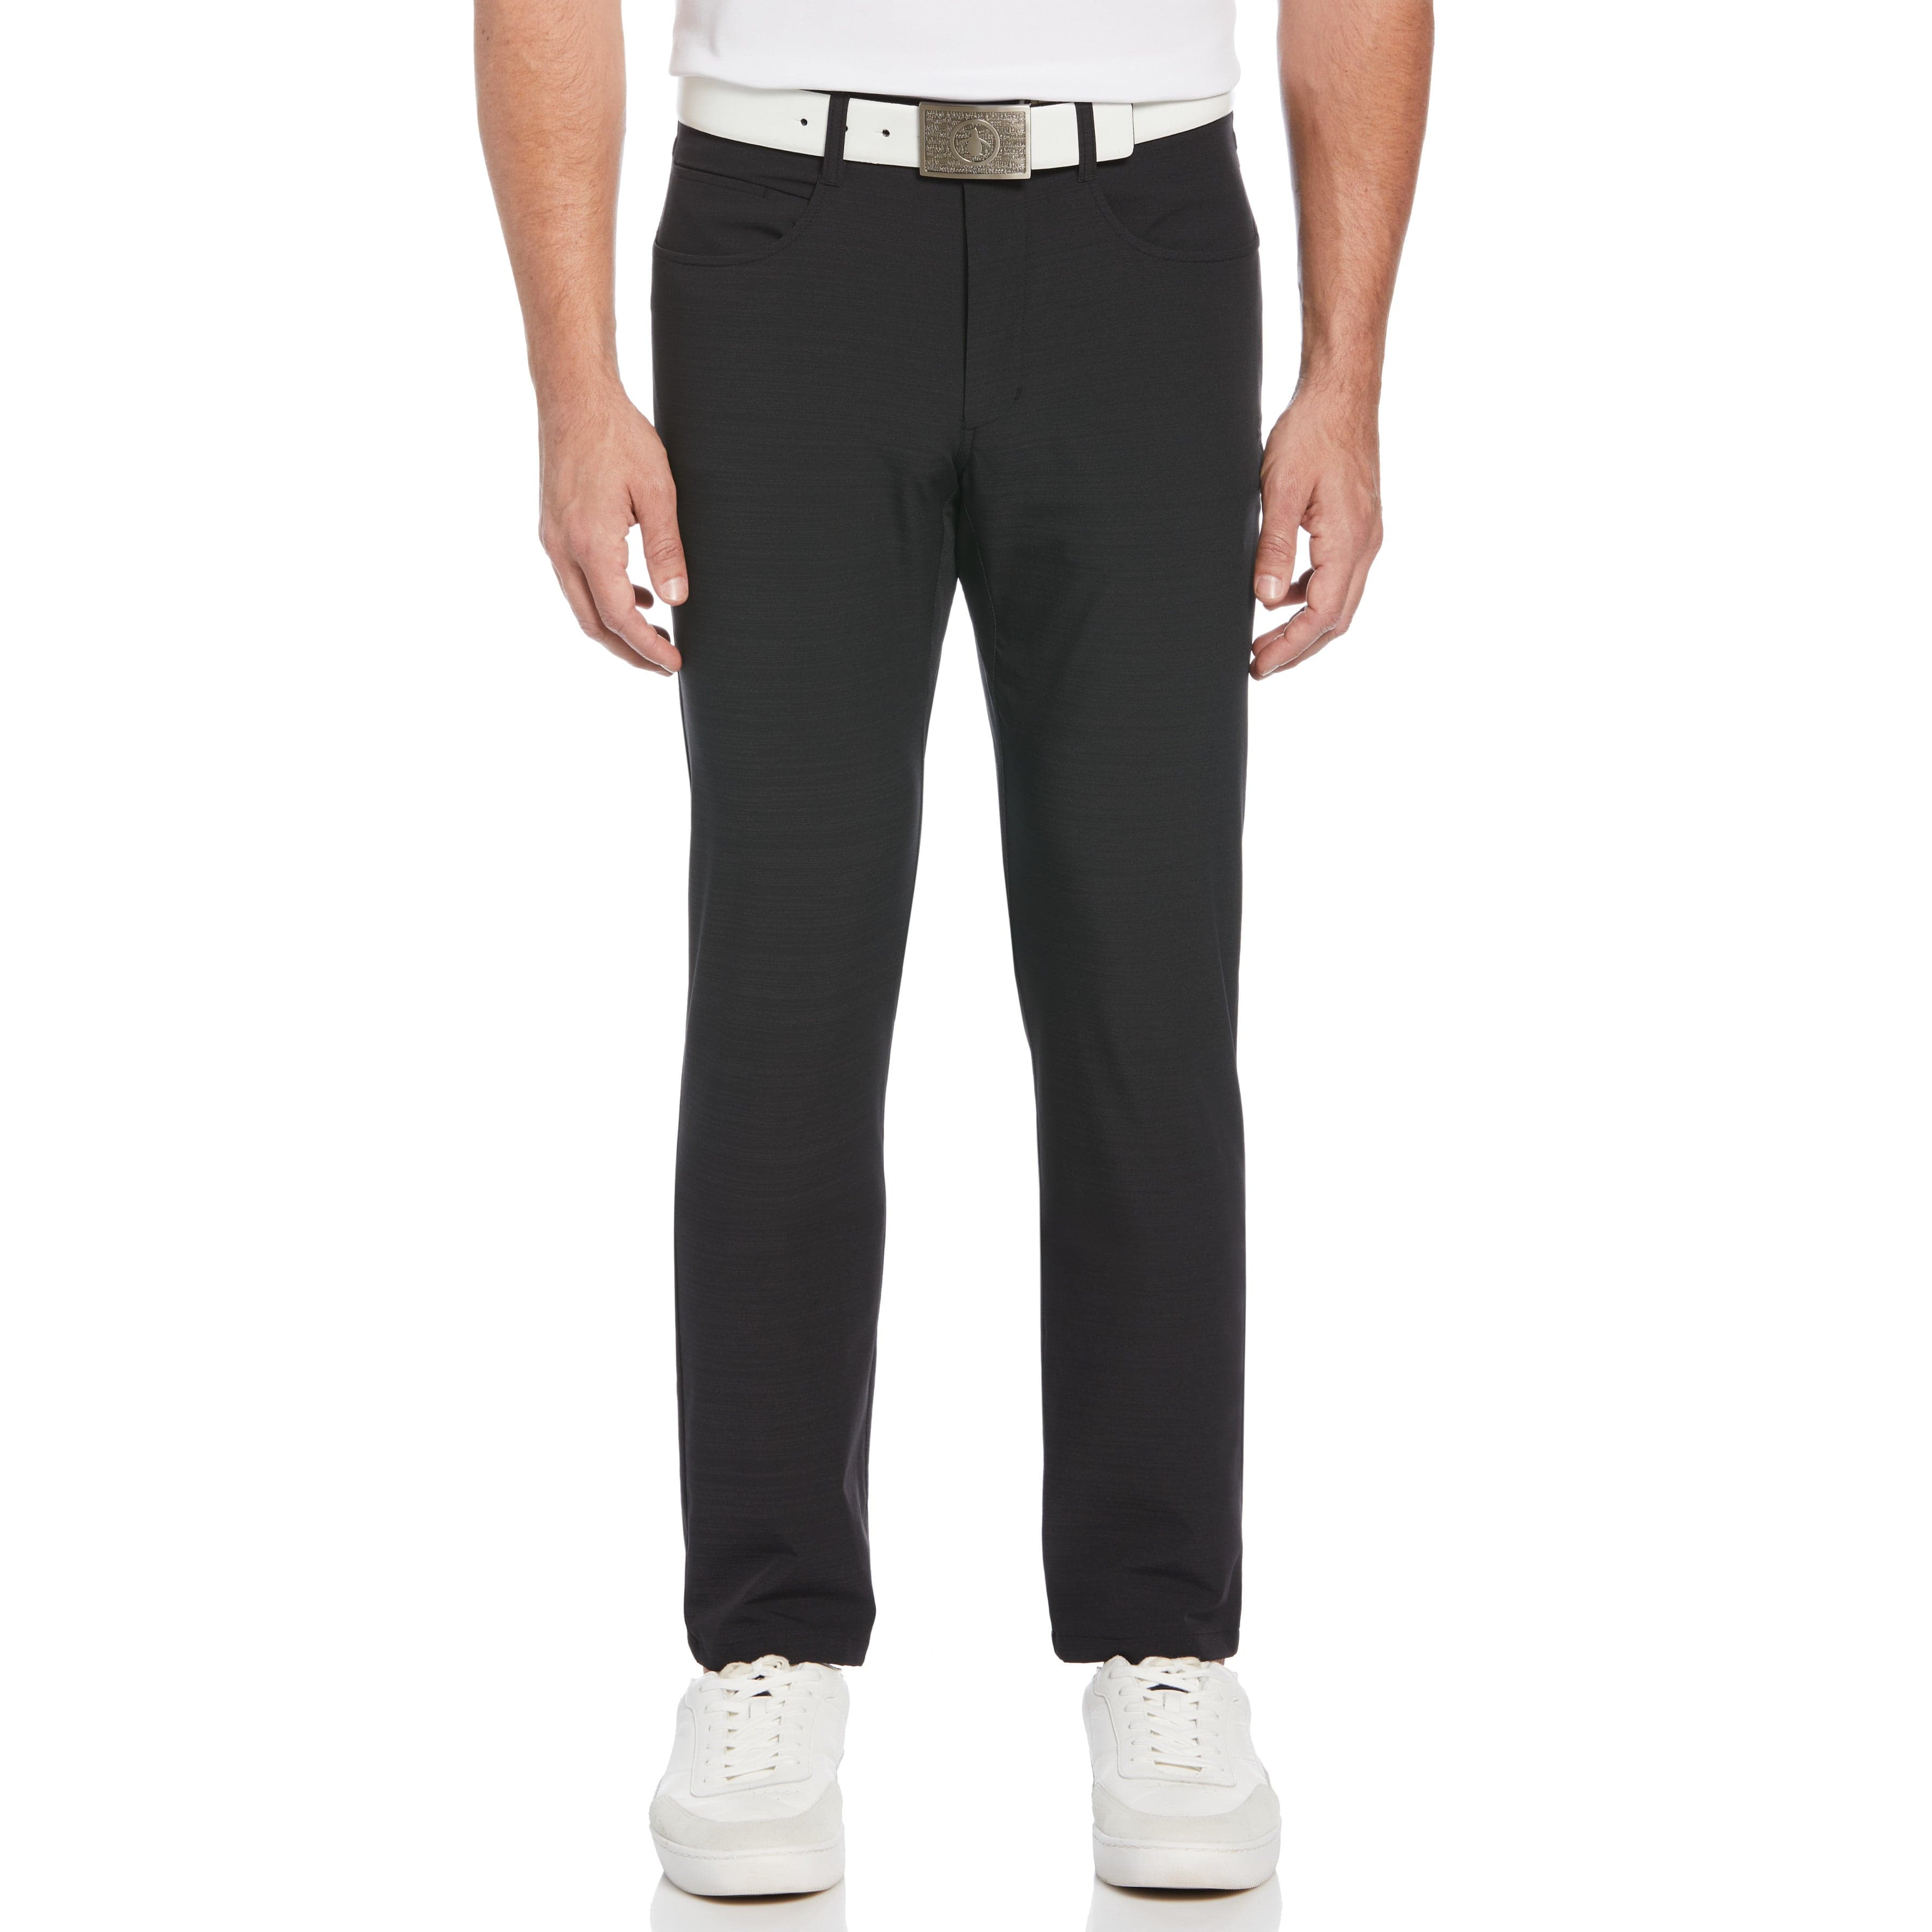 Premium Ribbed Jersey Slim Leg Trouser with Crossover Waistband